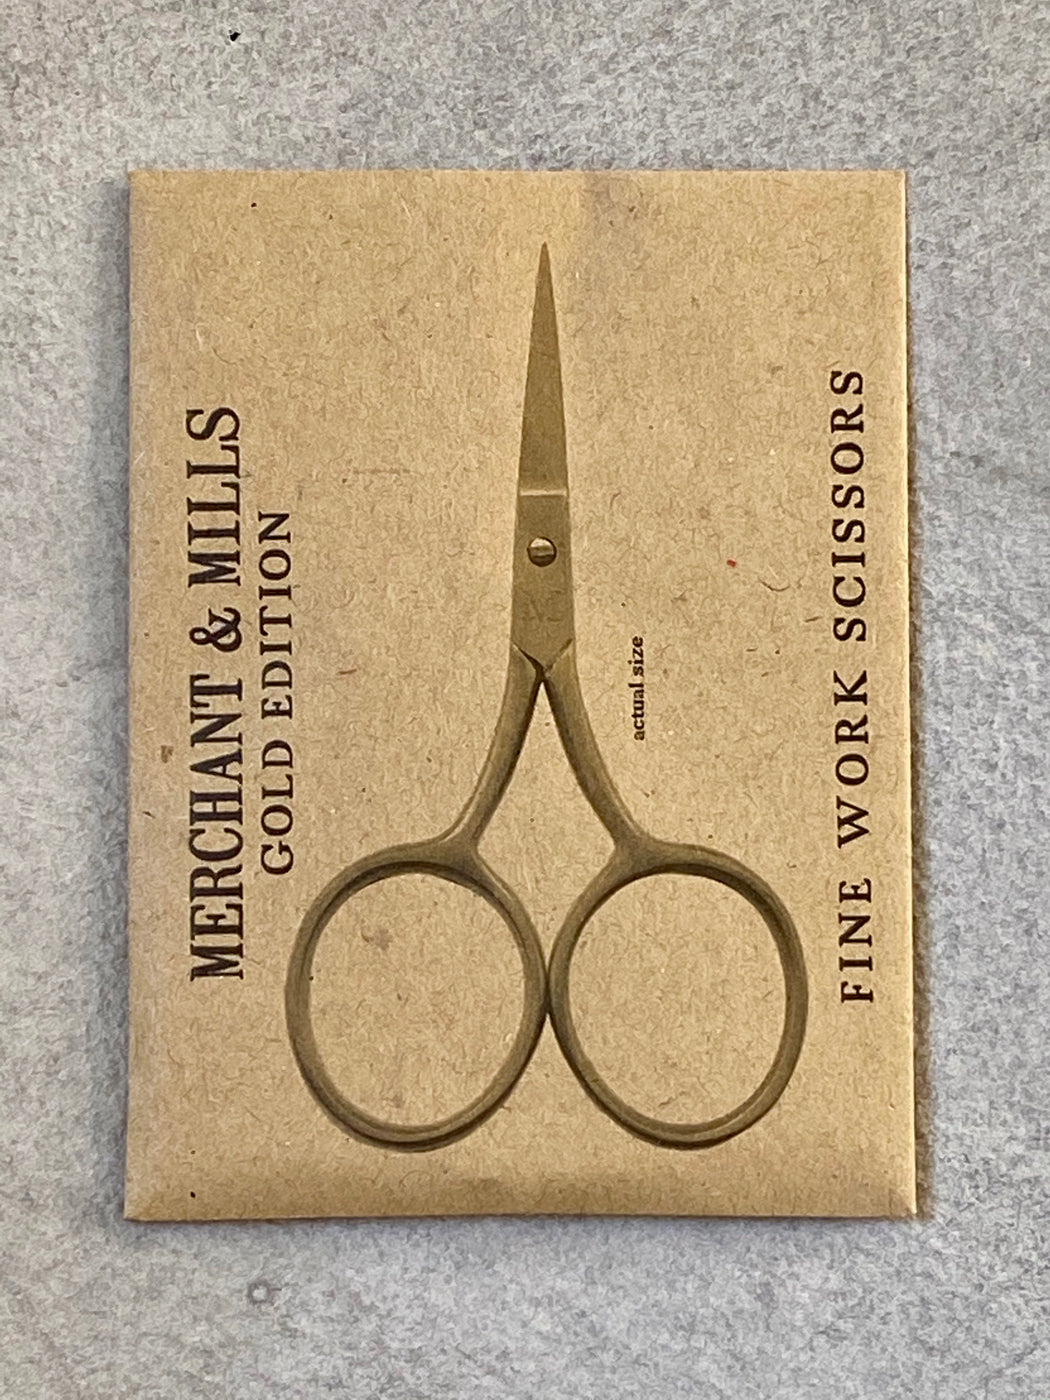 Merchant and Mills Fine Work Gold Scissors - The Websters